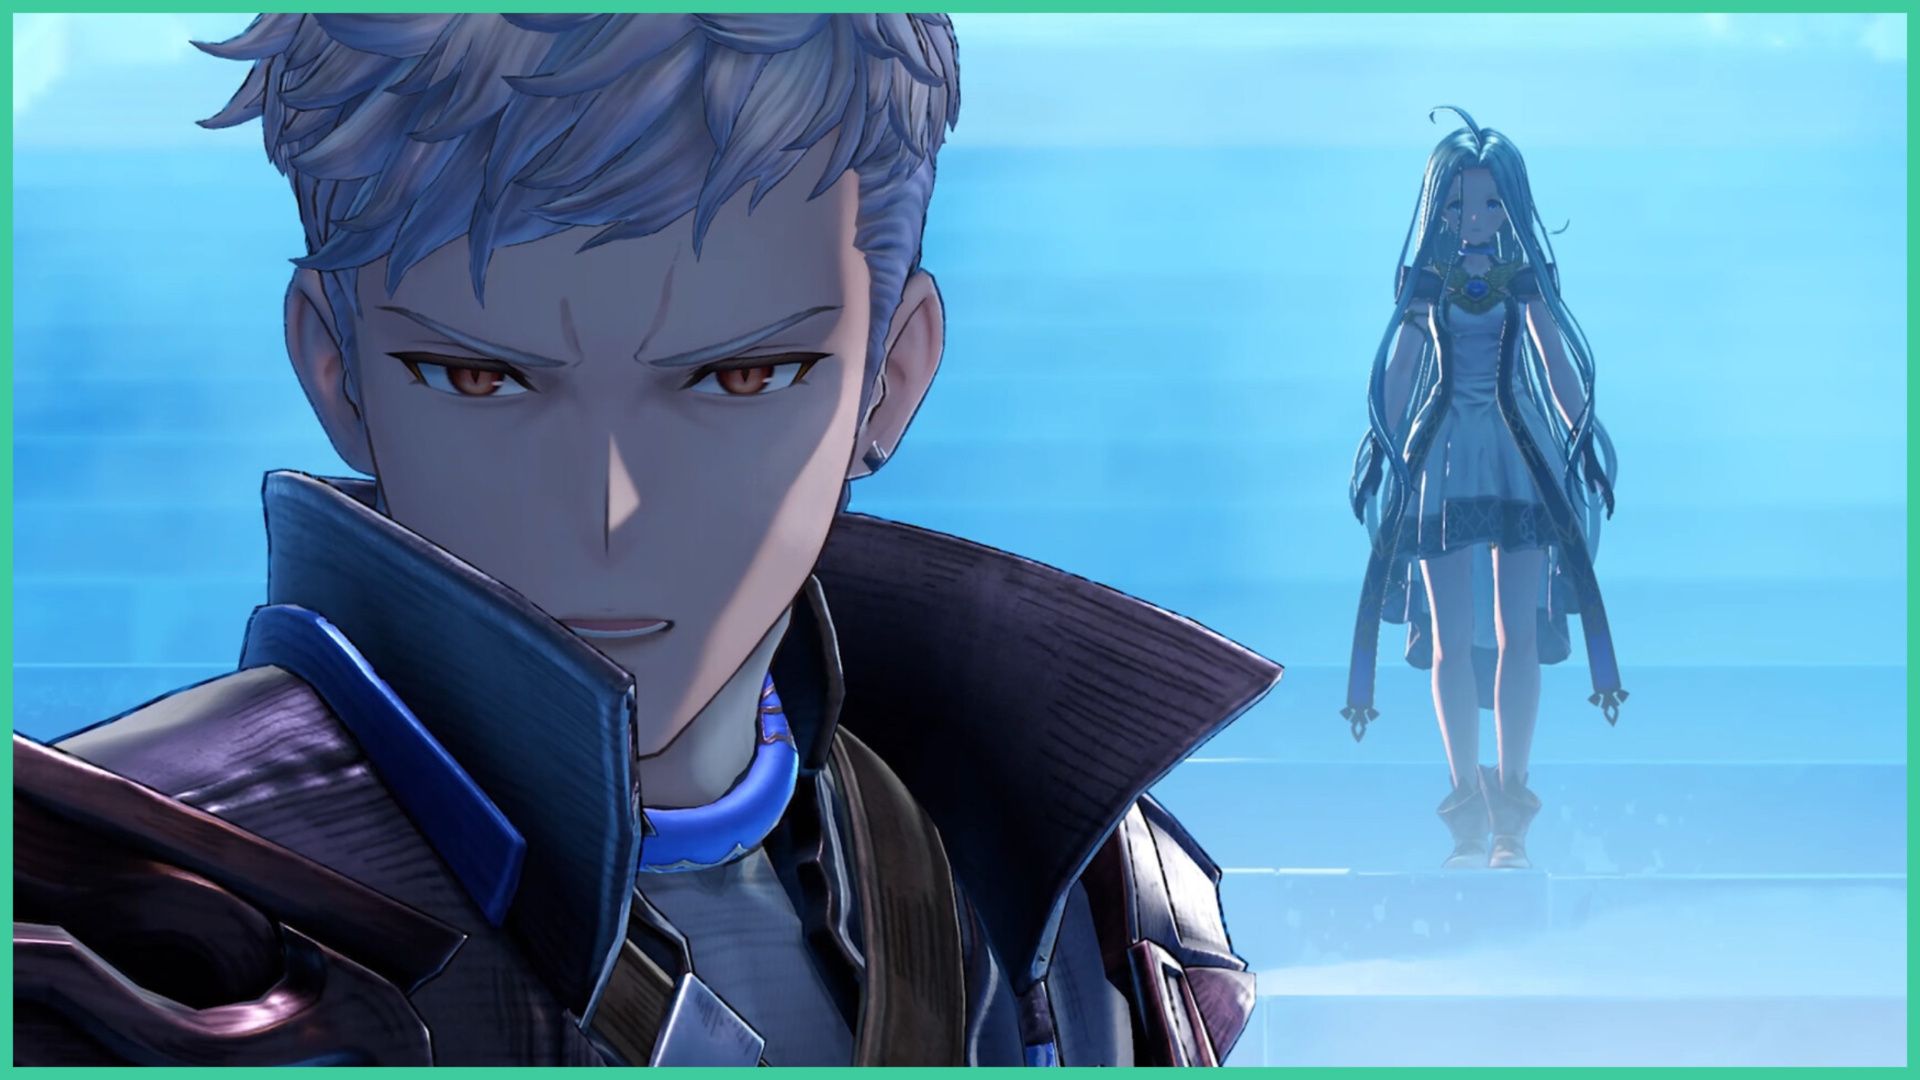 feature image for our granblue fantasy relink crewmate cards guide, the image features a male character at the forefront as a female character is behind him as she walks towards him, he has a stern expression on his face as the woman walks down some steps